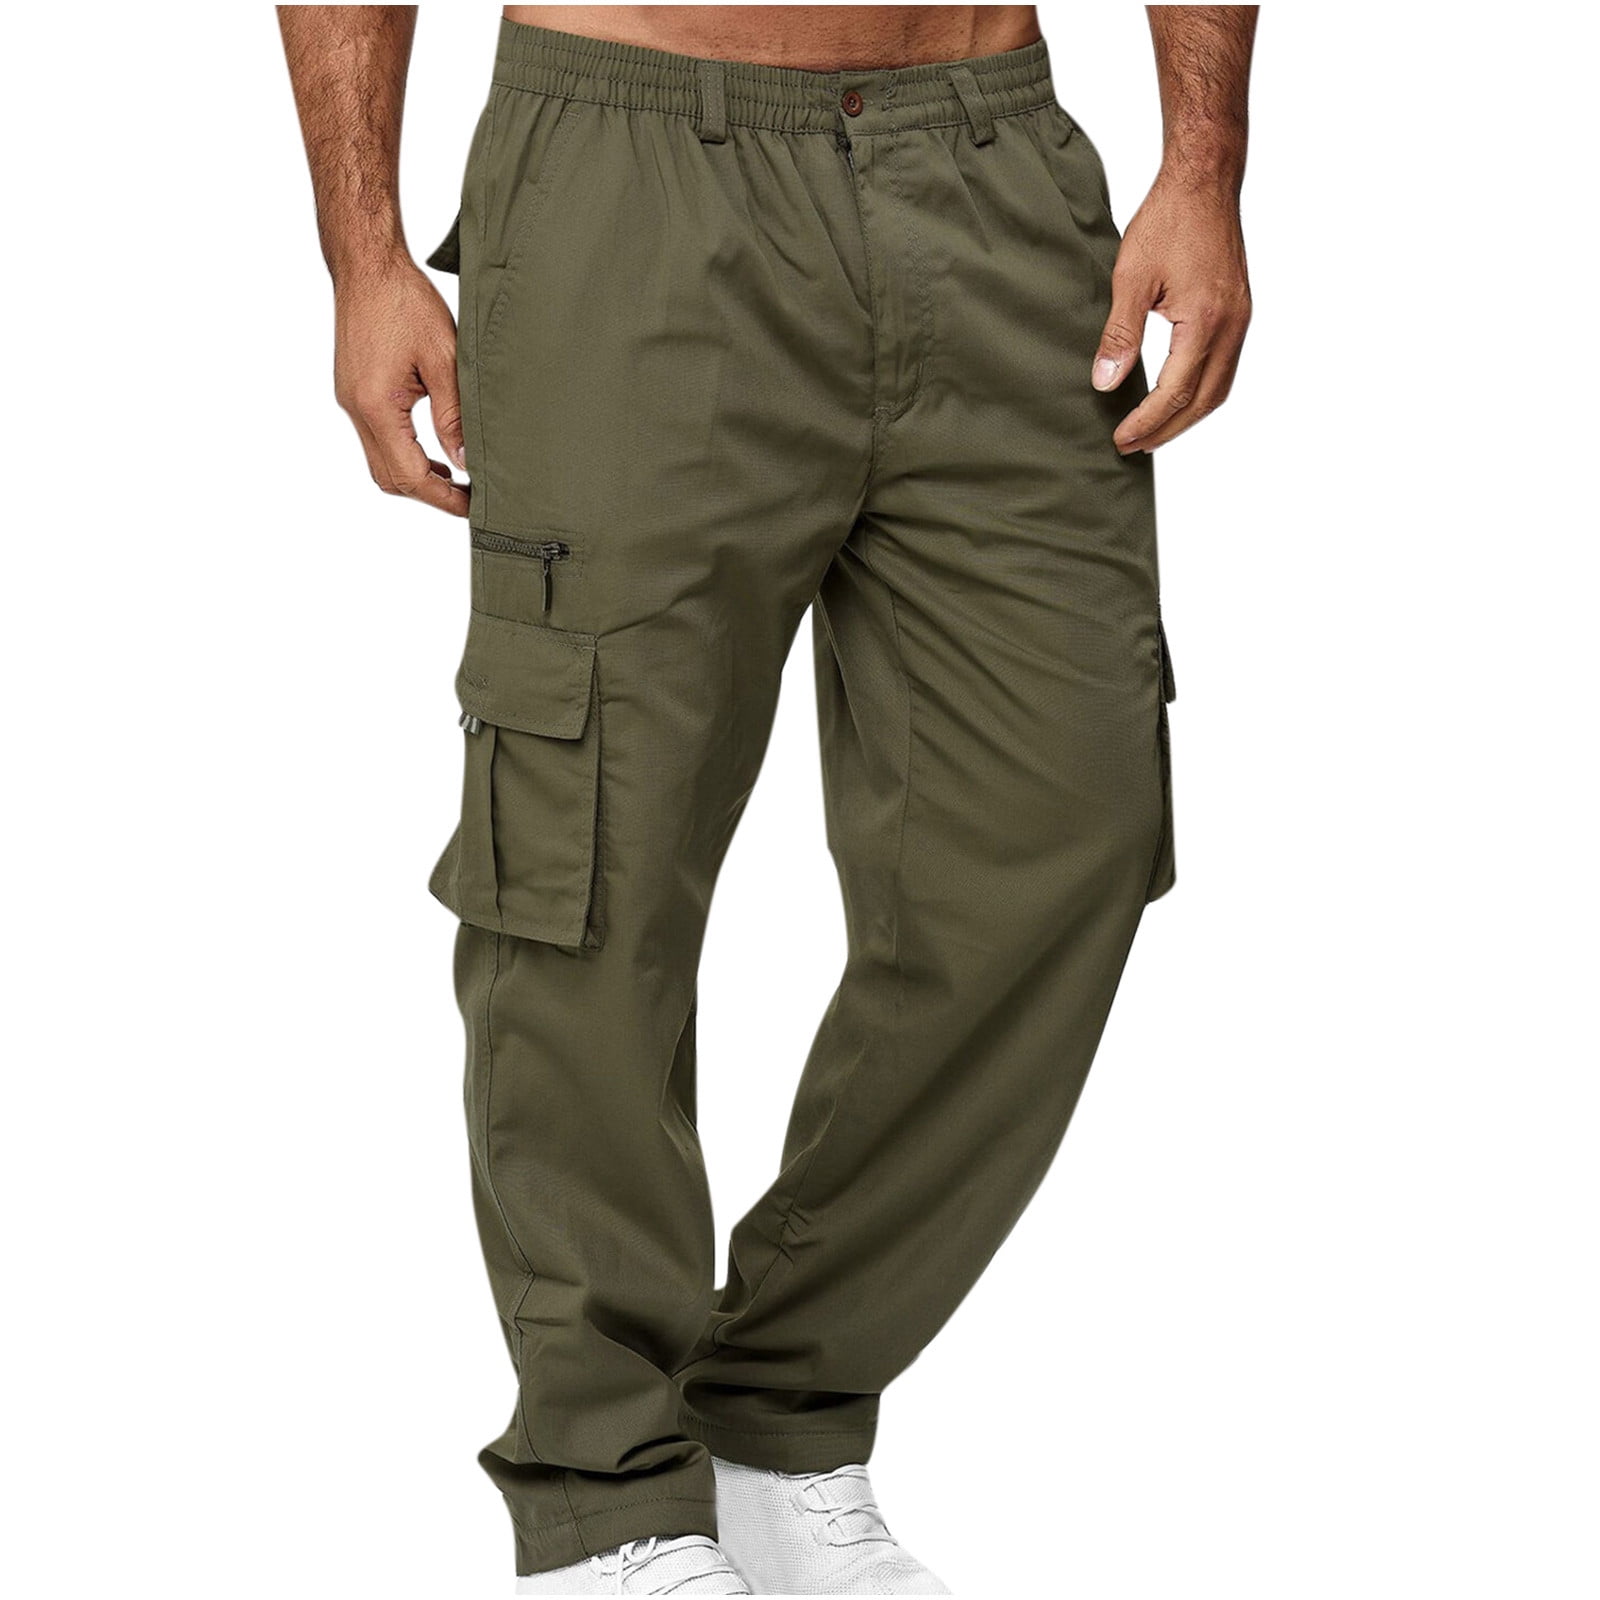 Hfyihgf Men Outdoor Cargo Pant Lightweight Drawstring Relaxed Fit Pant  Hiking Jogger Classic Fit Multi PocketsArmy Green,XXL